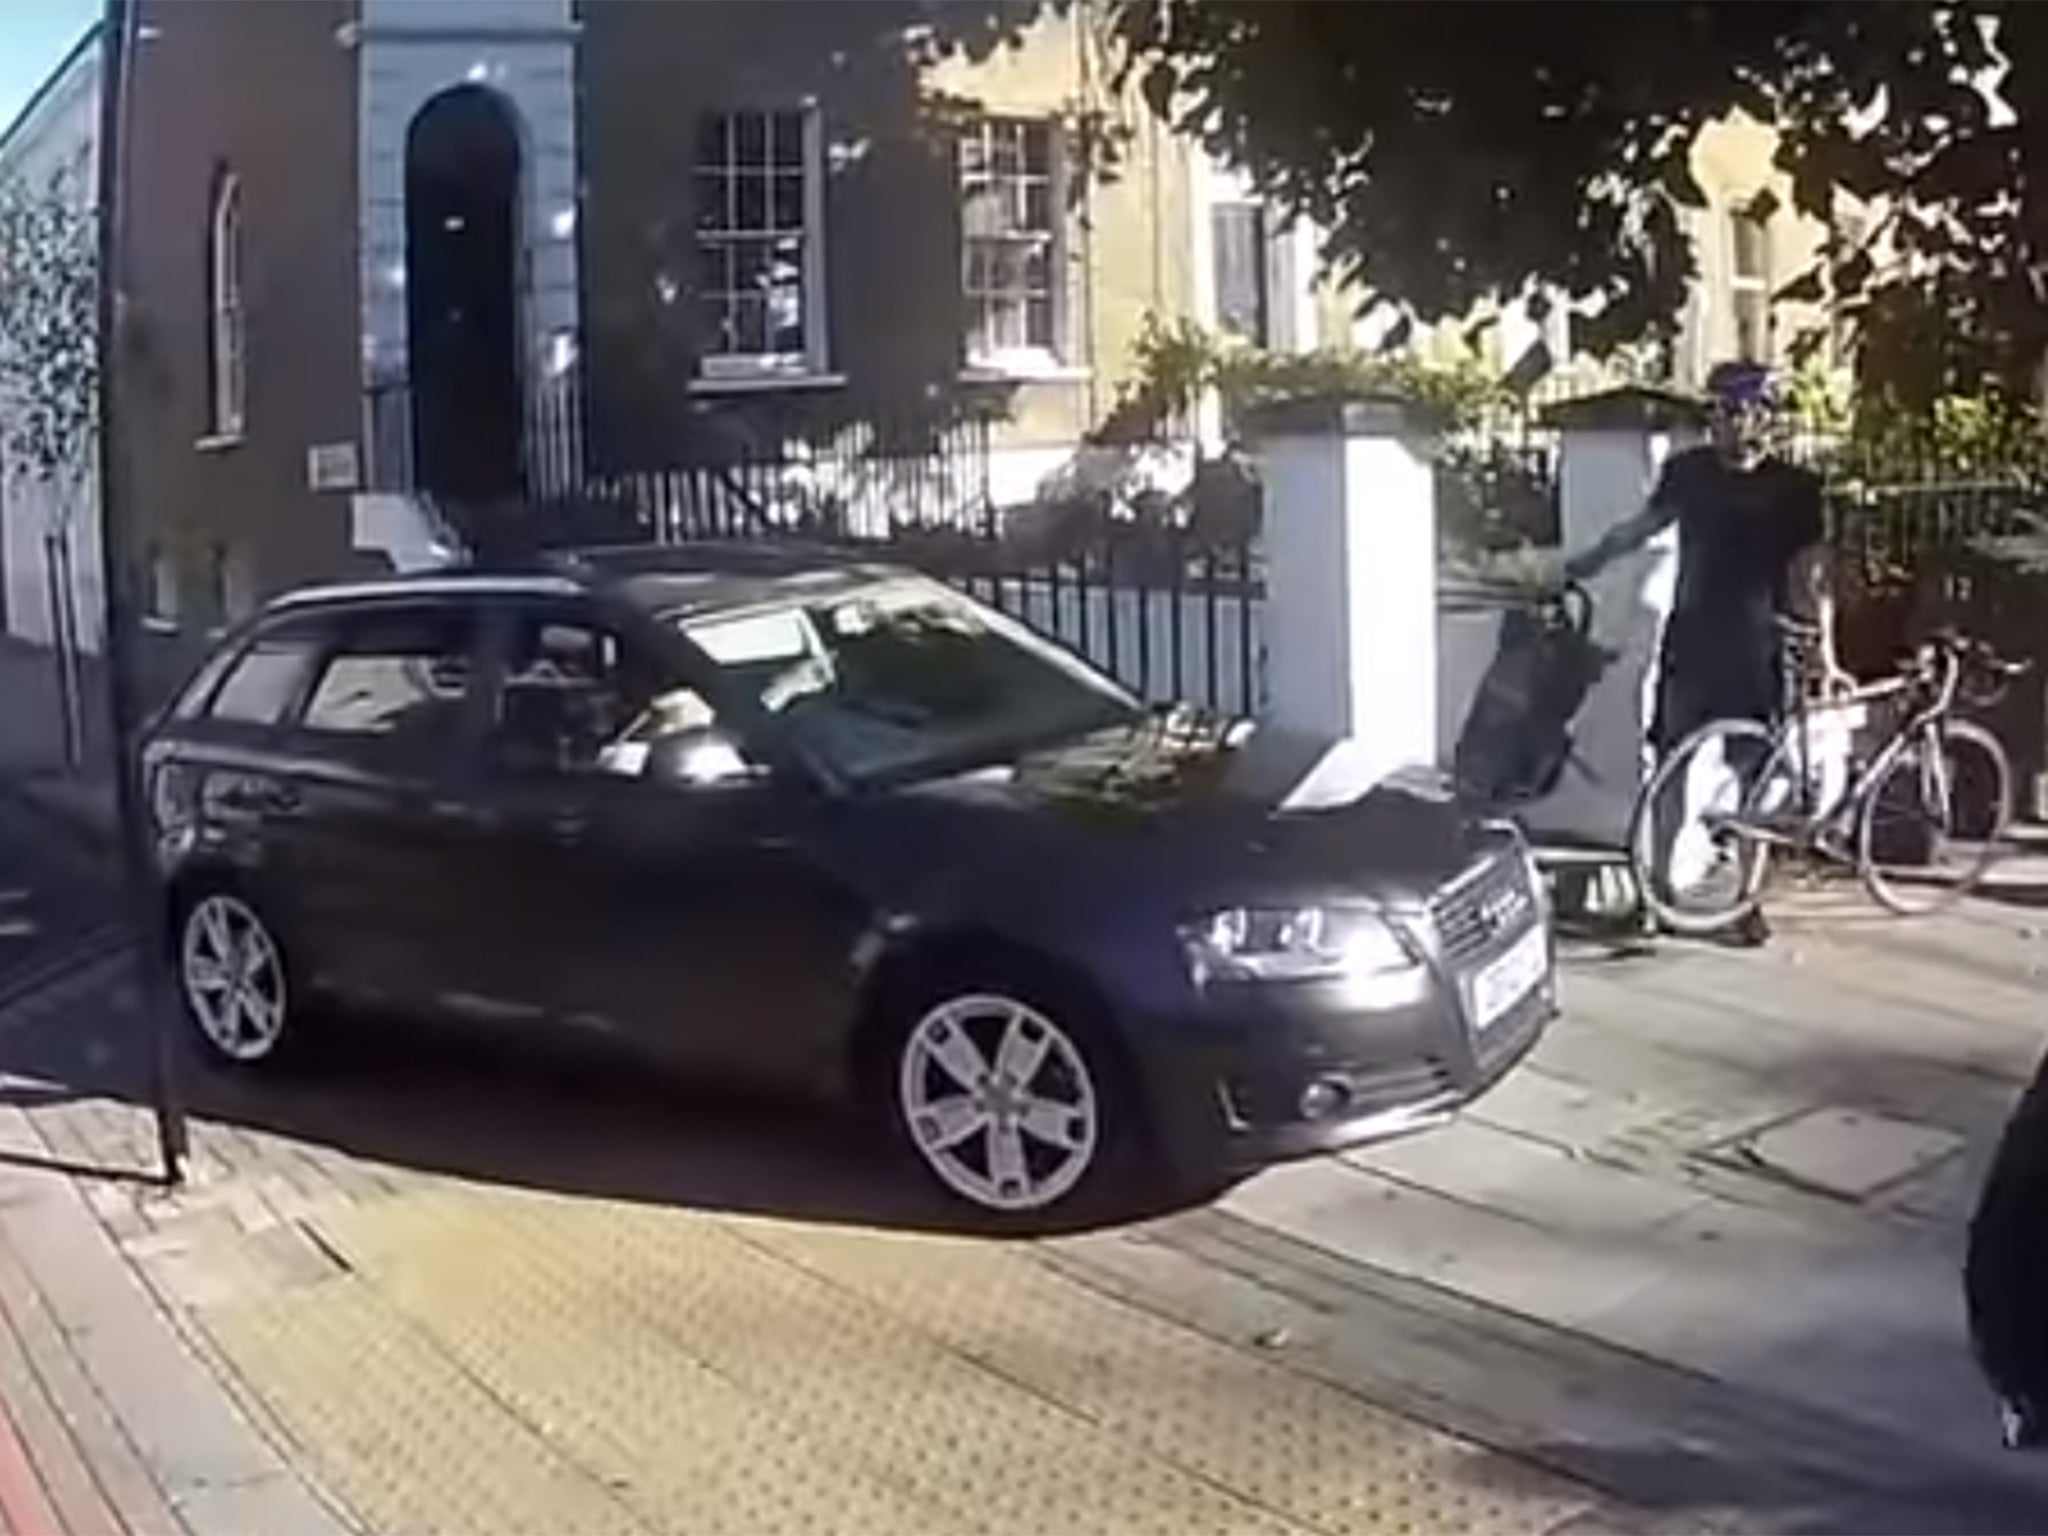 The driver is seen in the video mounting the curb and driving towards cyclists